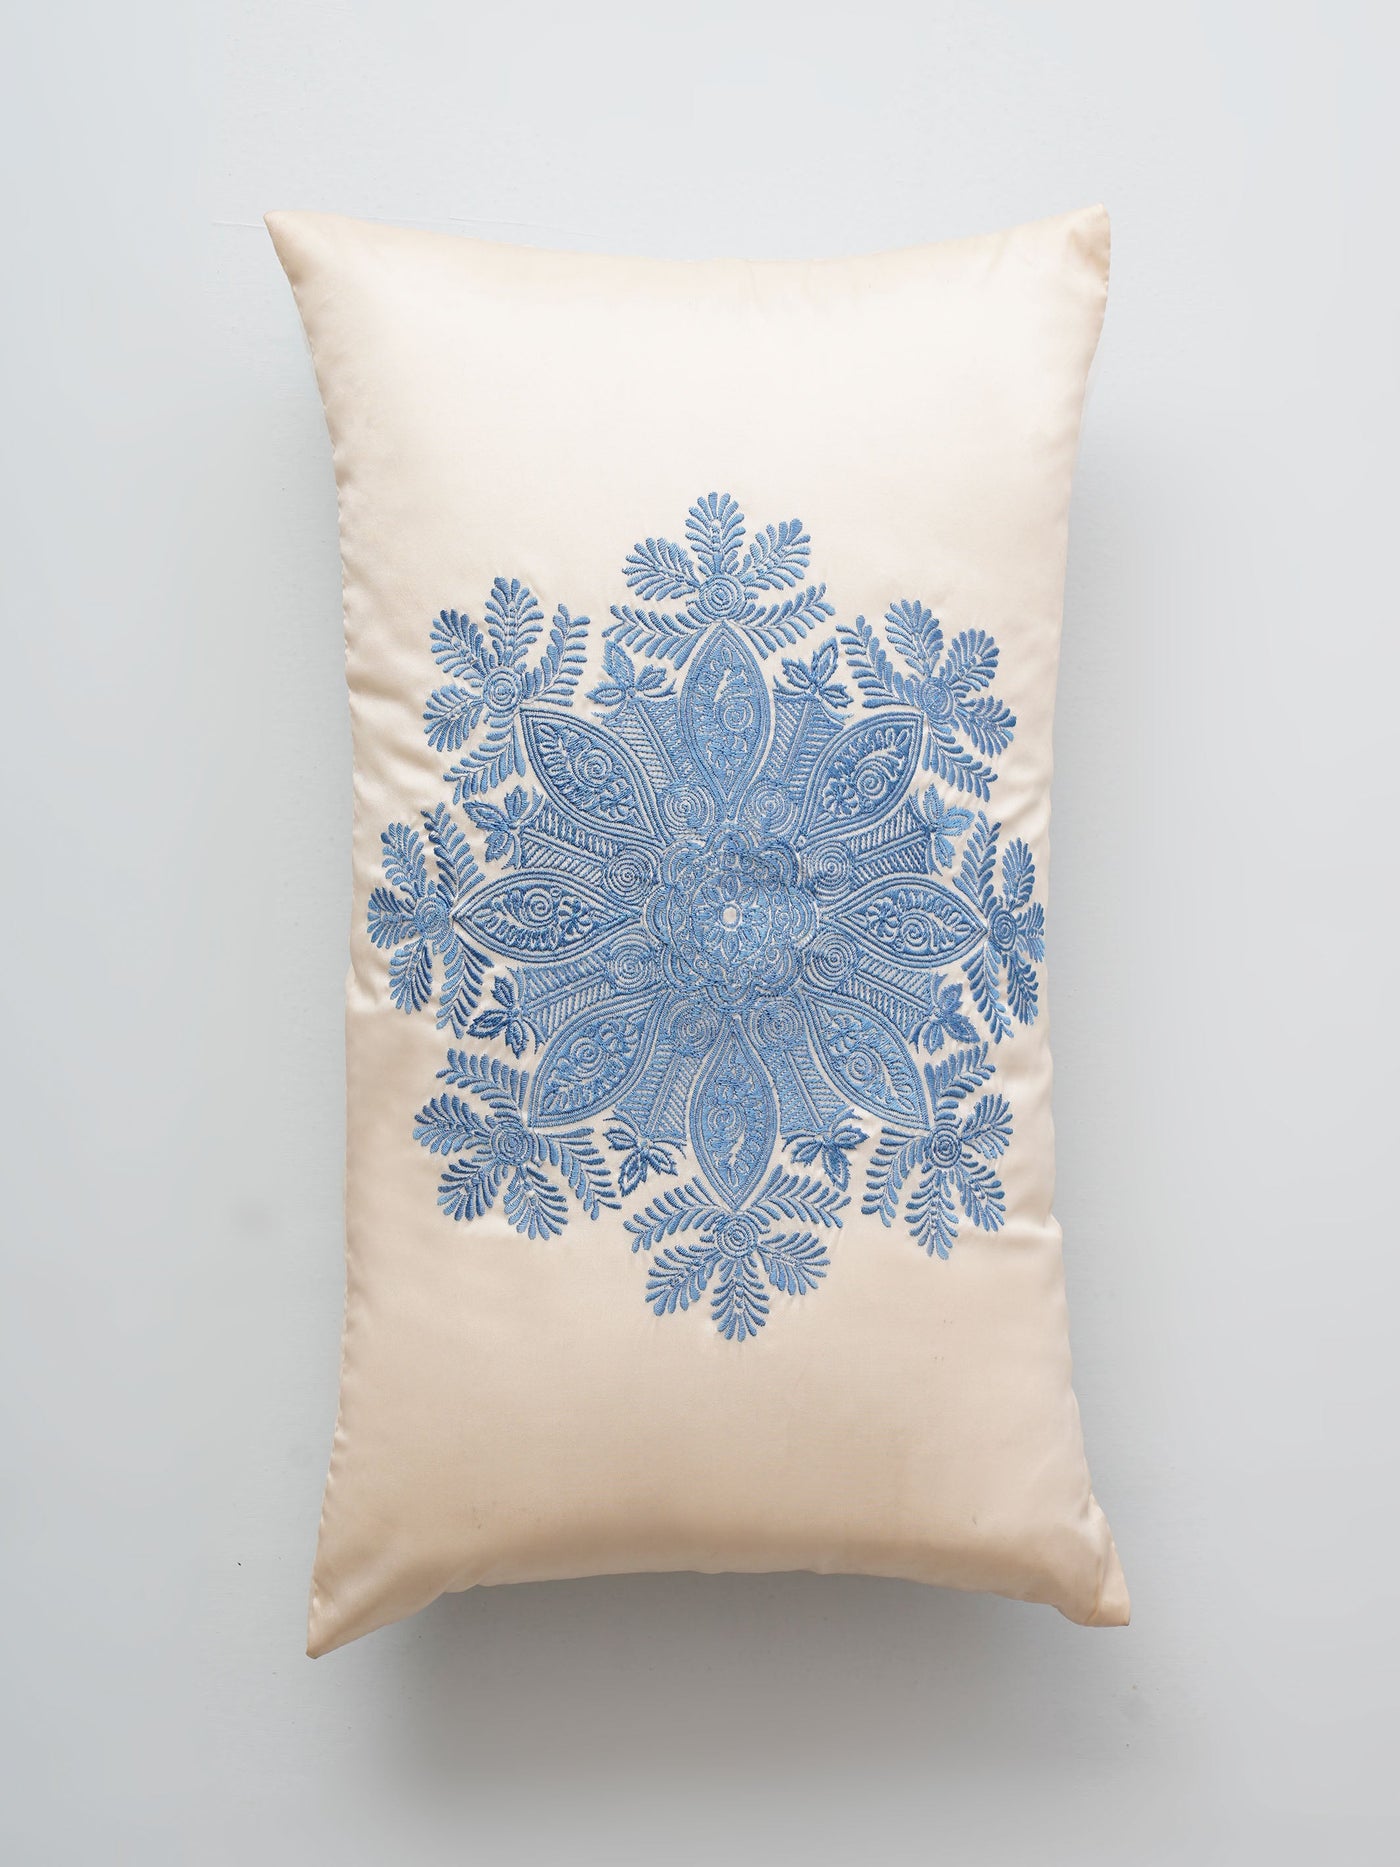 Cushion Cover - Medallian Embroidered